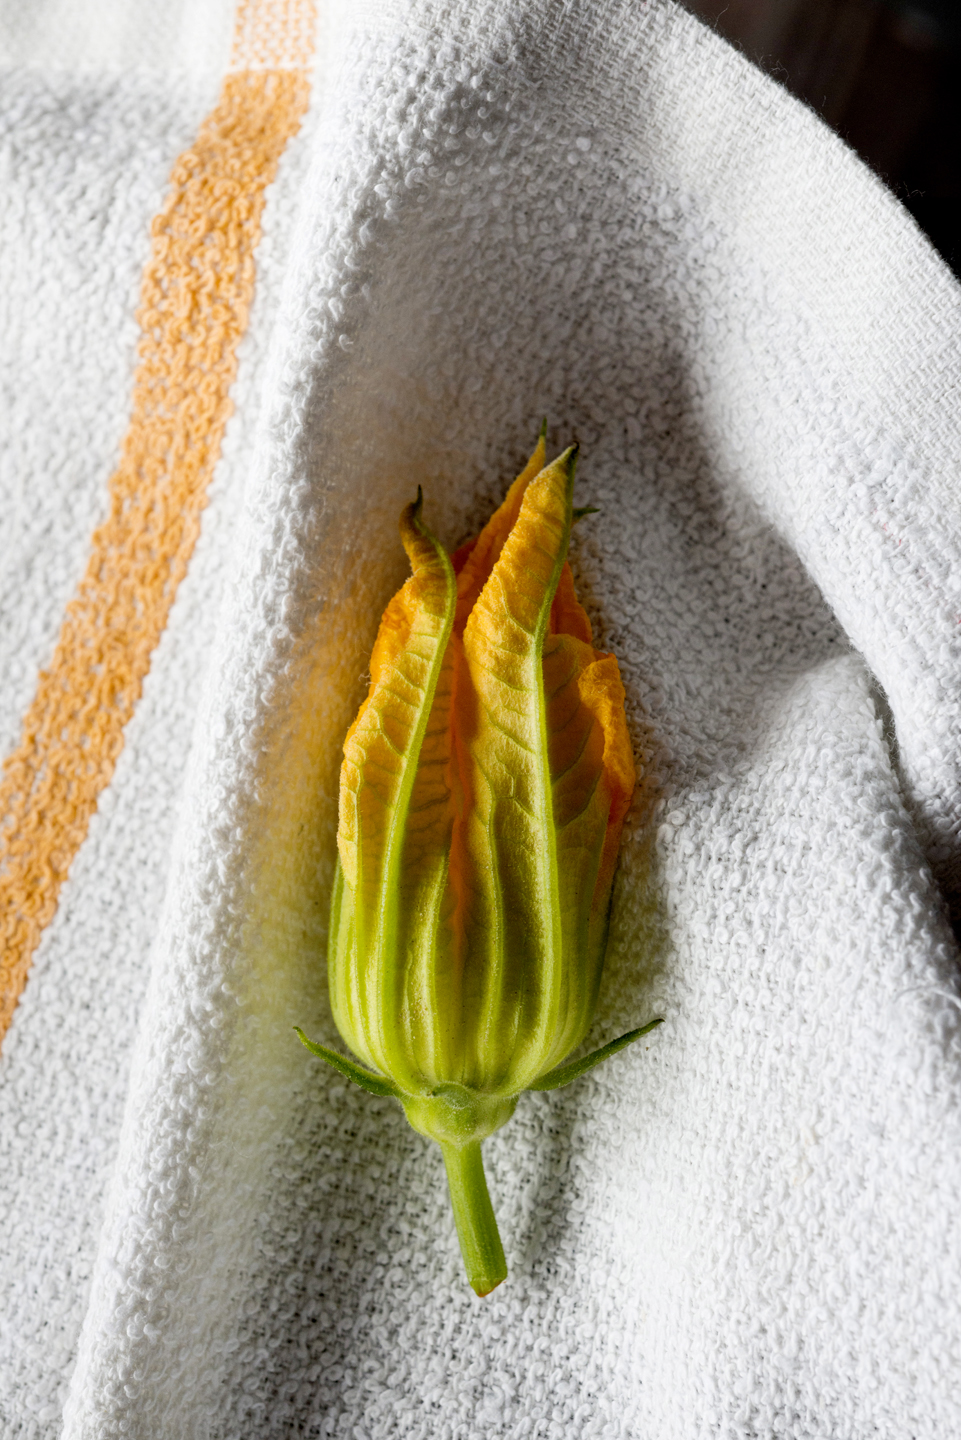 Squash Blossoms on a knit towel